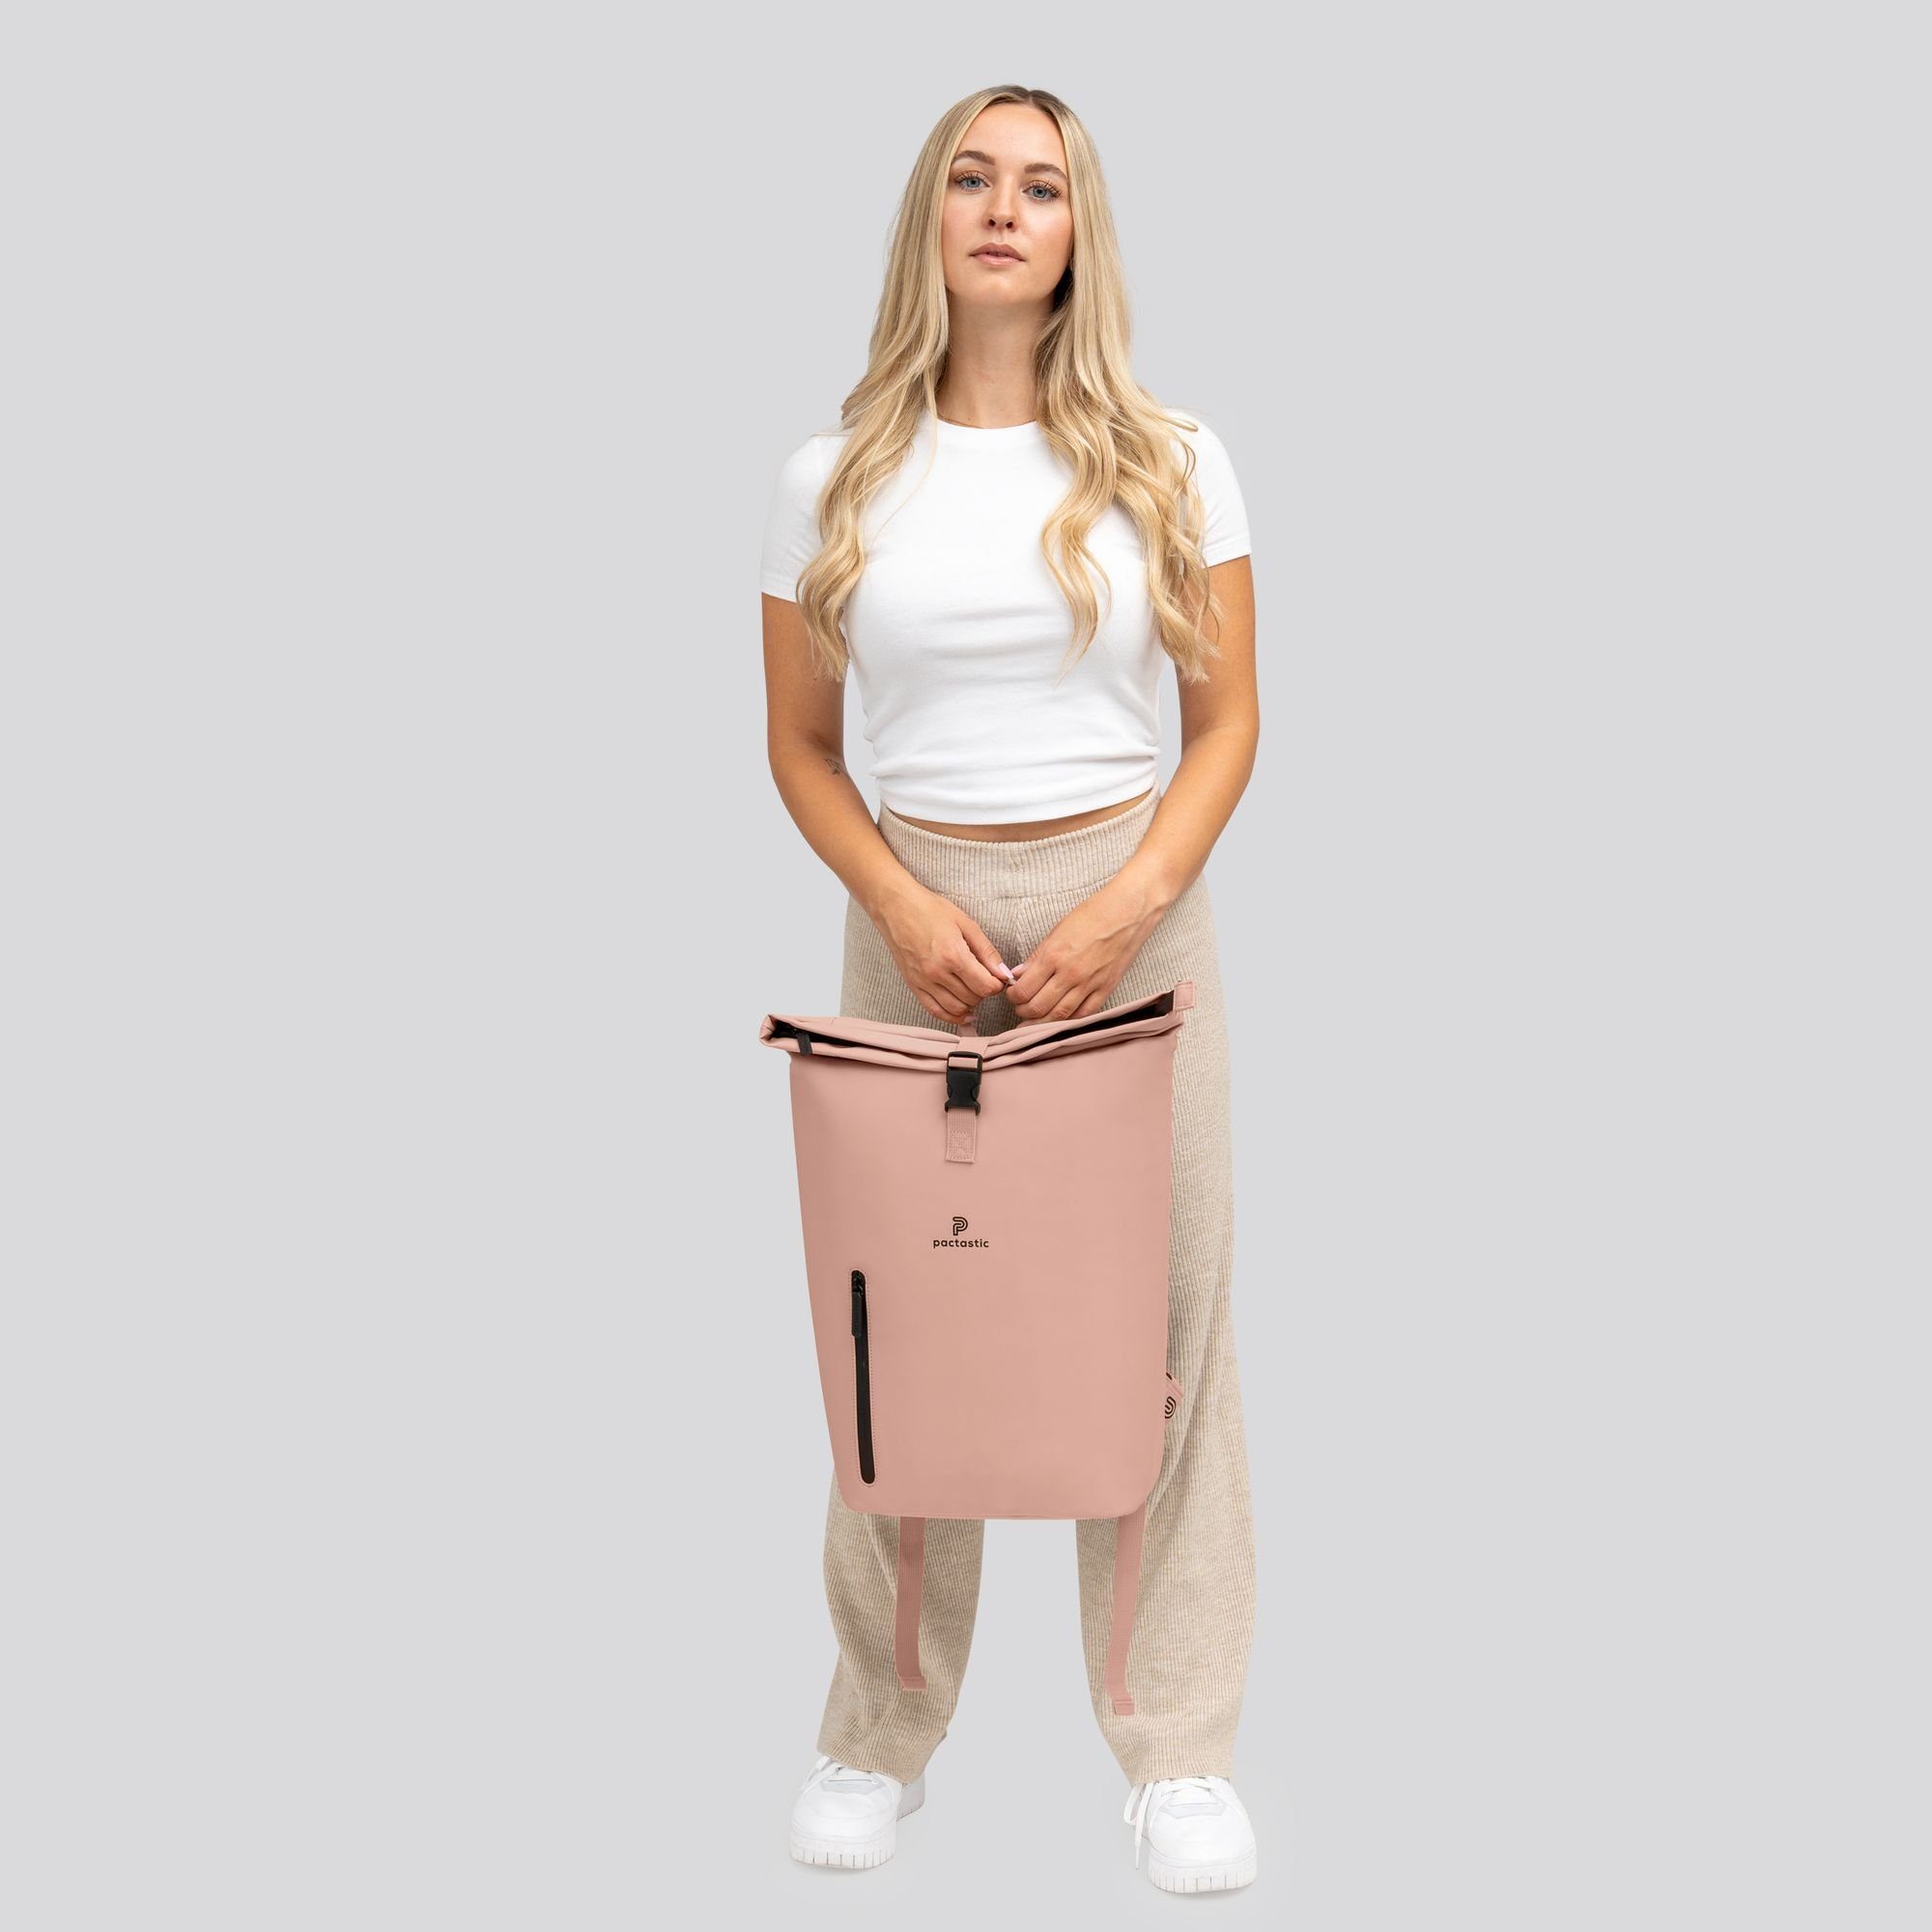 Pactastic Daypack Urban Collection, Veganes Tech-Material rose